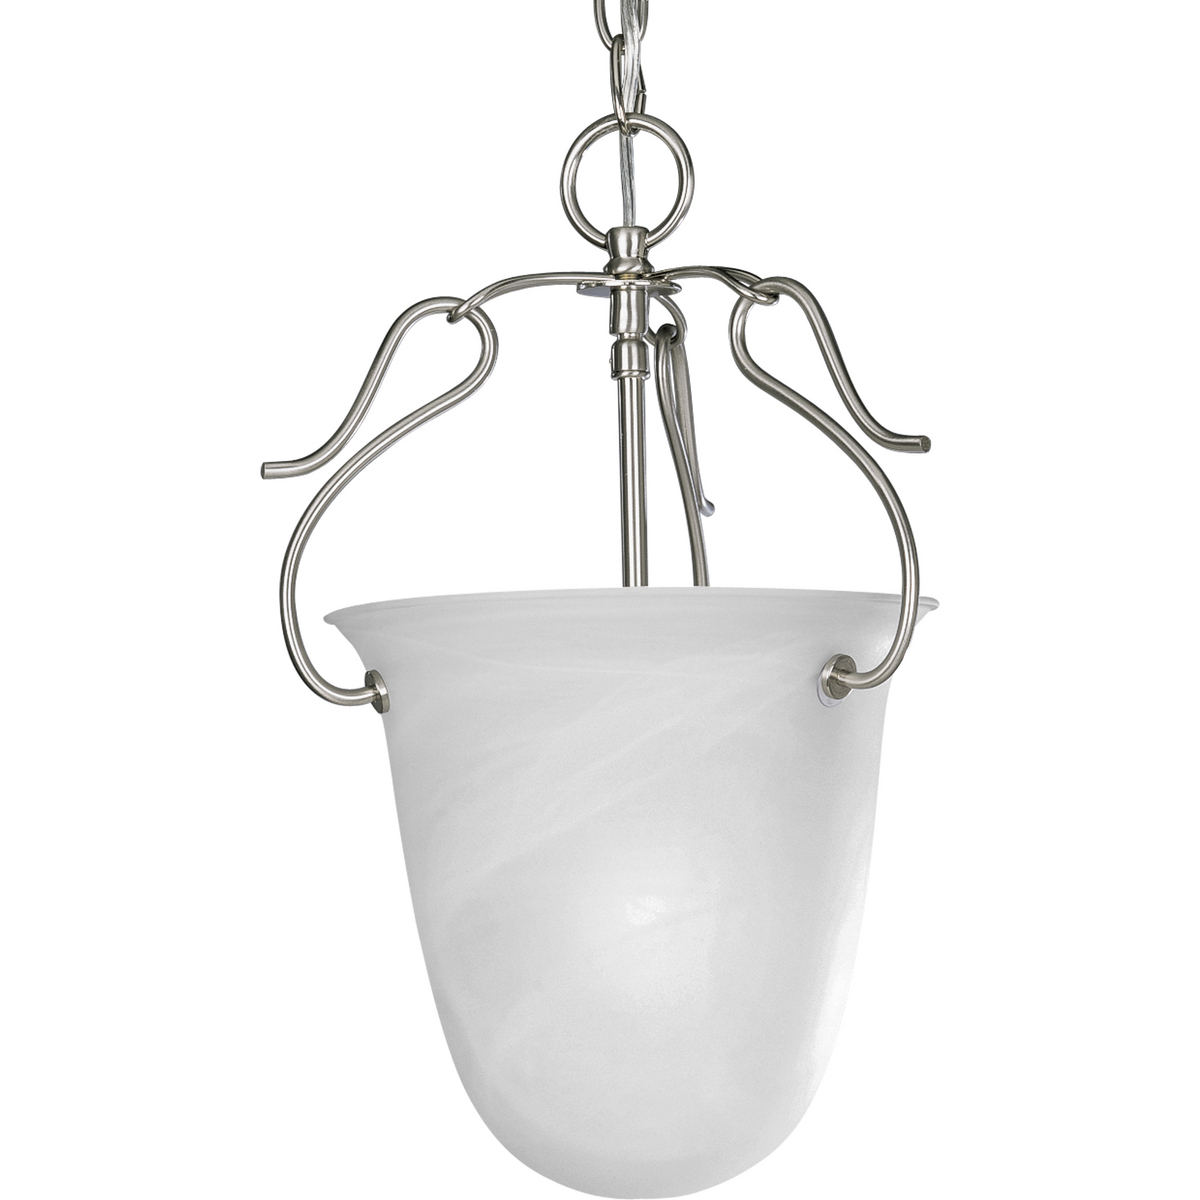 One-light foyer fixture with etched alabaster glass from the Bedford Collection features softly diffused alabaster glass shades on a finely crafted frame. Striking metallic finish adds richness and depth to the fixture. The style blends well with today's home fashion and provides the perfect accent to your decor. Chain & ceiling mounts both included.